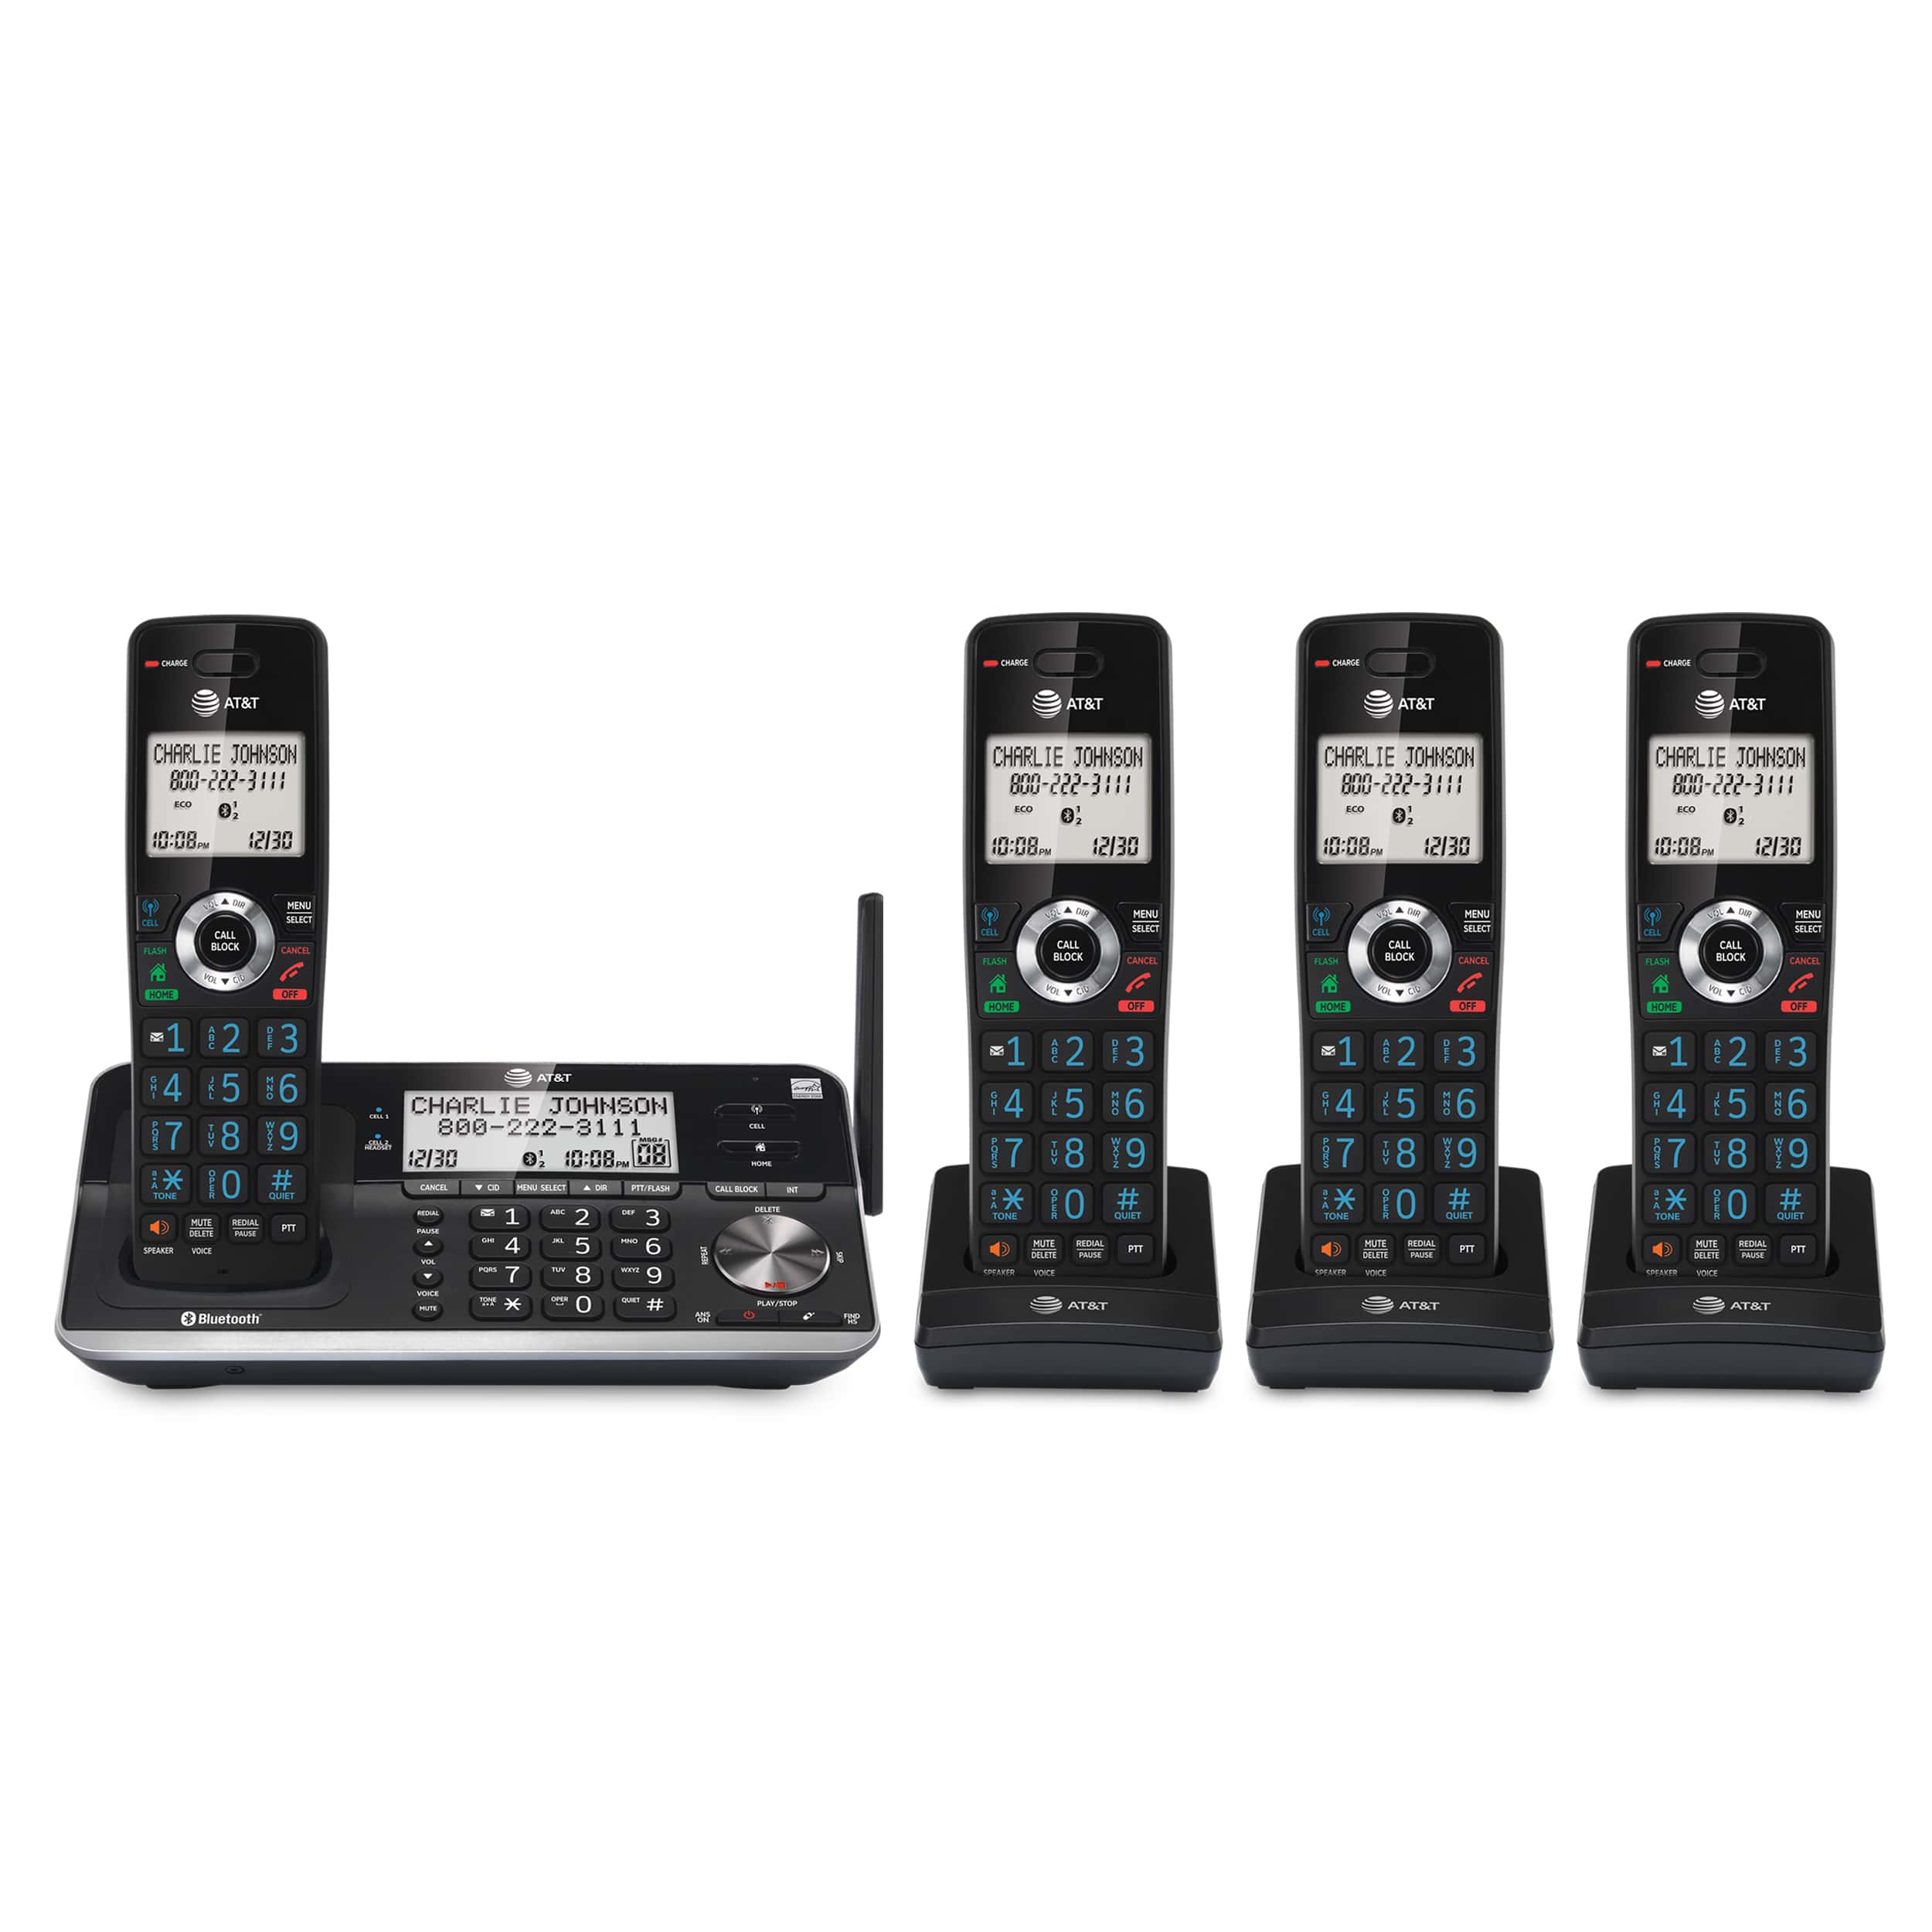 4-Handset Expandable Cordless Phone with Unsurpassed Range, Bluetooth Connect to Cell™, Smart Call Blocker and Answering System - view 2